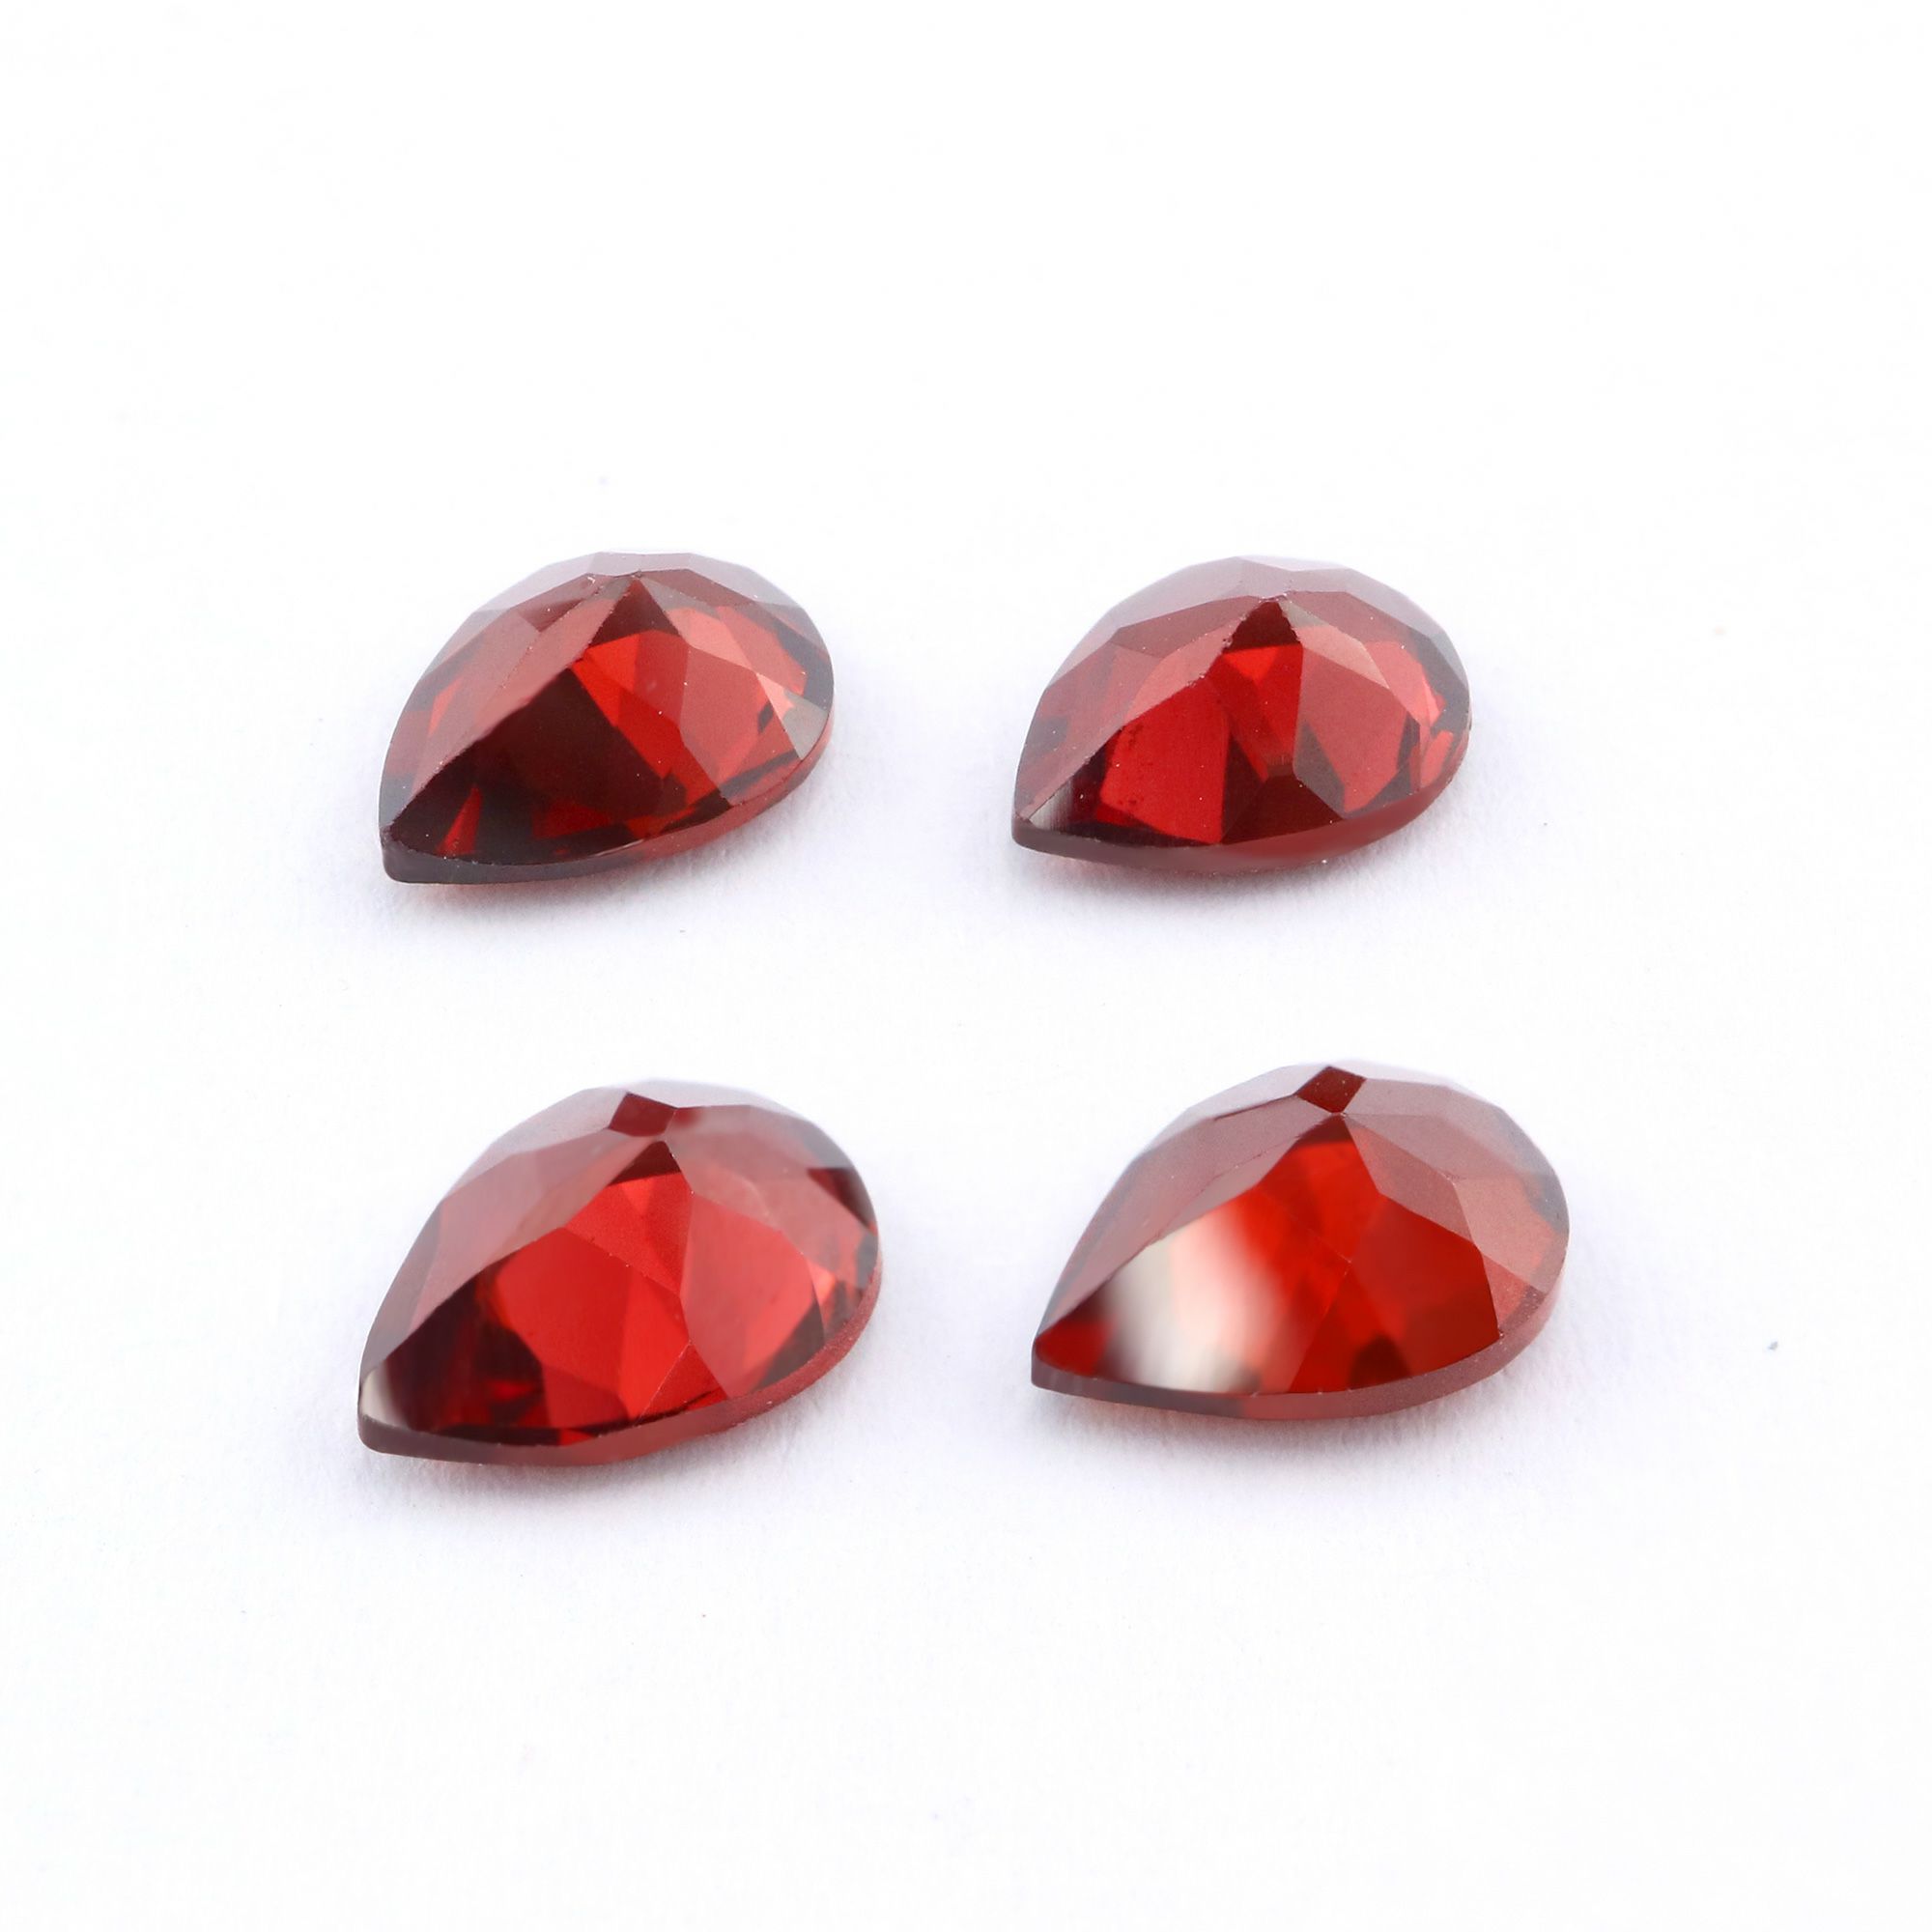 5Pcs Natural Red Garnet January Birthstone Pear Faceted Loose Gemstone Nature Semi Precious Stone DIY Jewelry Supplies 4150010 - Click Image to Close